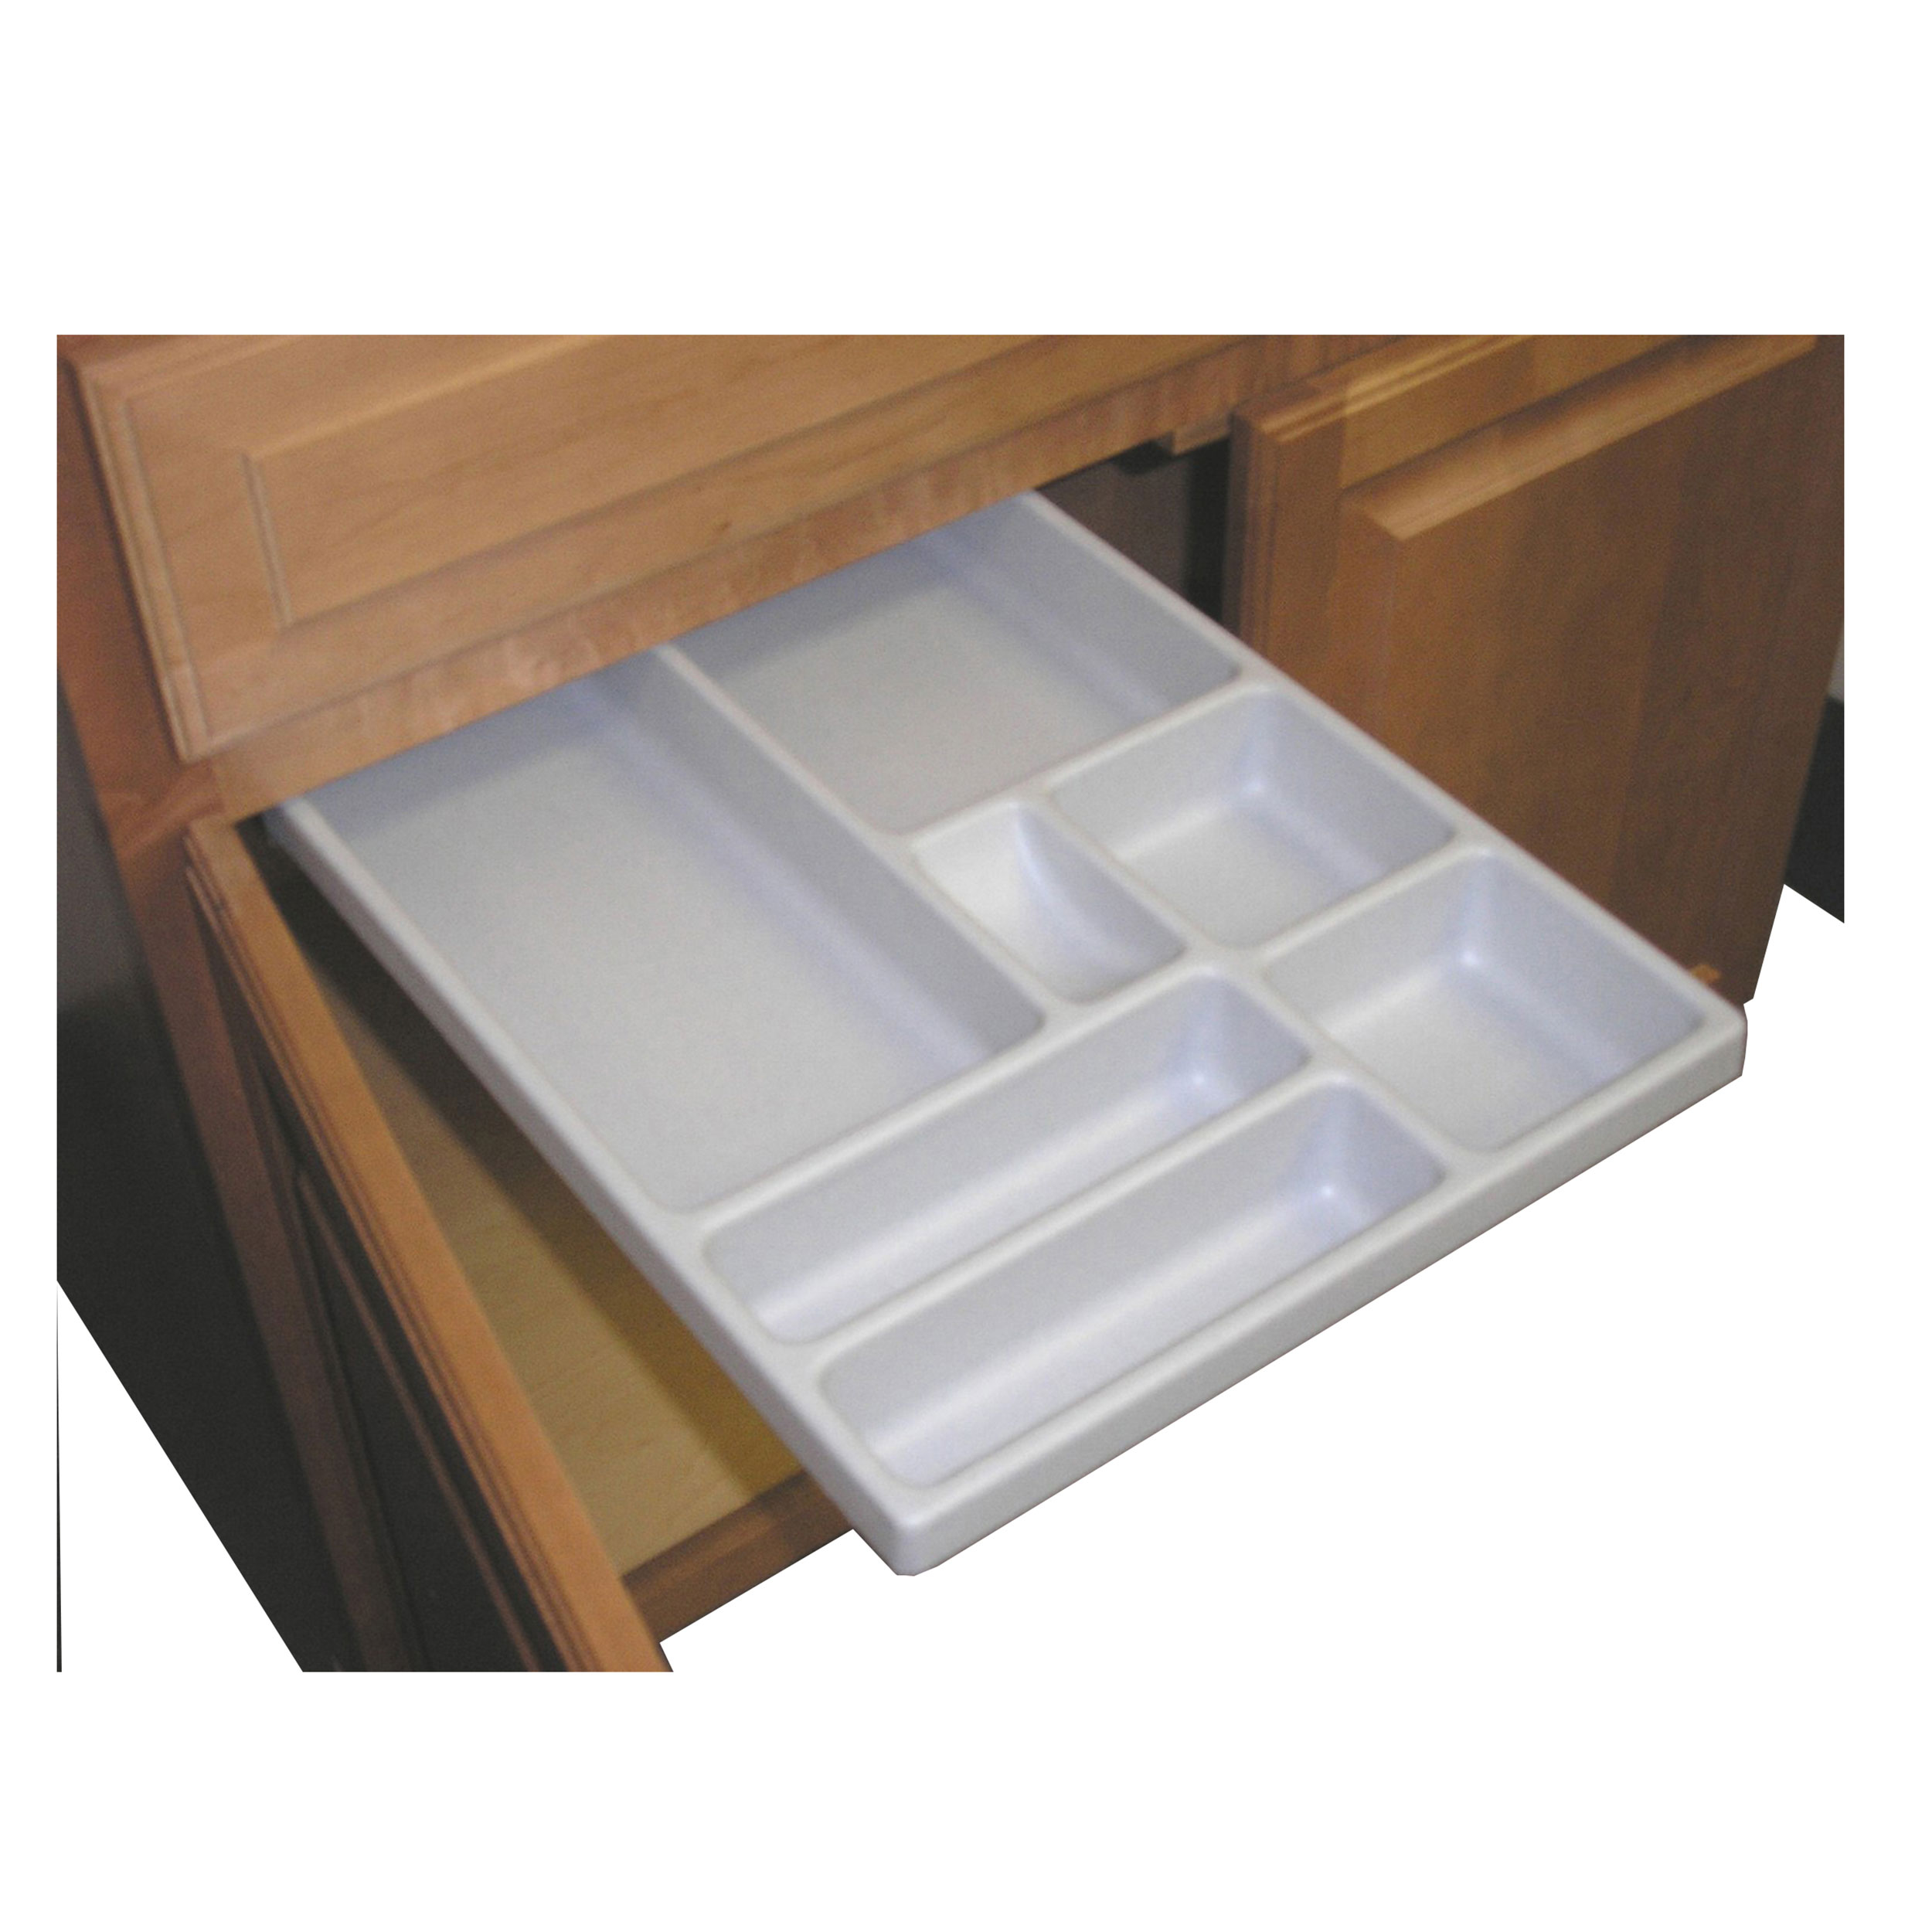 13 X 21 Inch Ez Slide N Store Large Slide-out Tray For Base Cabinets